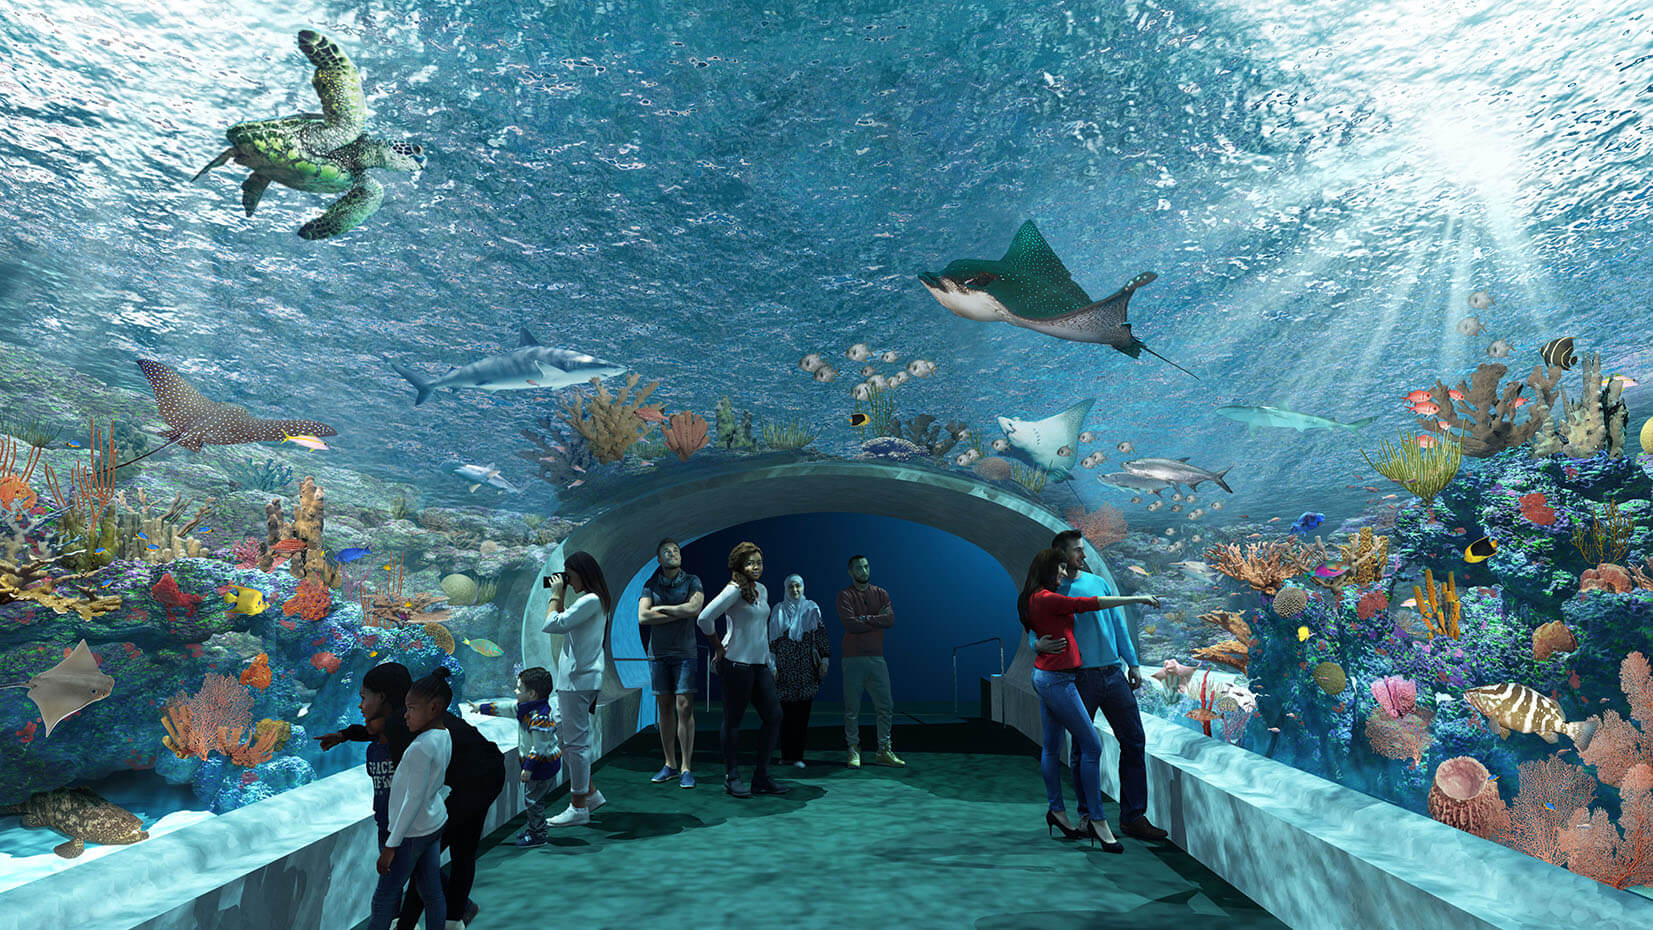 renderings of a glass-enclosed tunnel at an aquarium with brightly colored coral